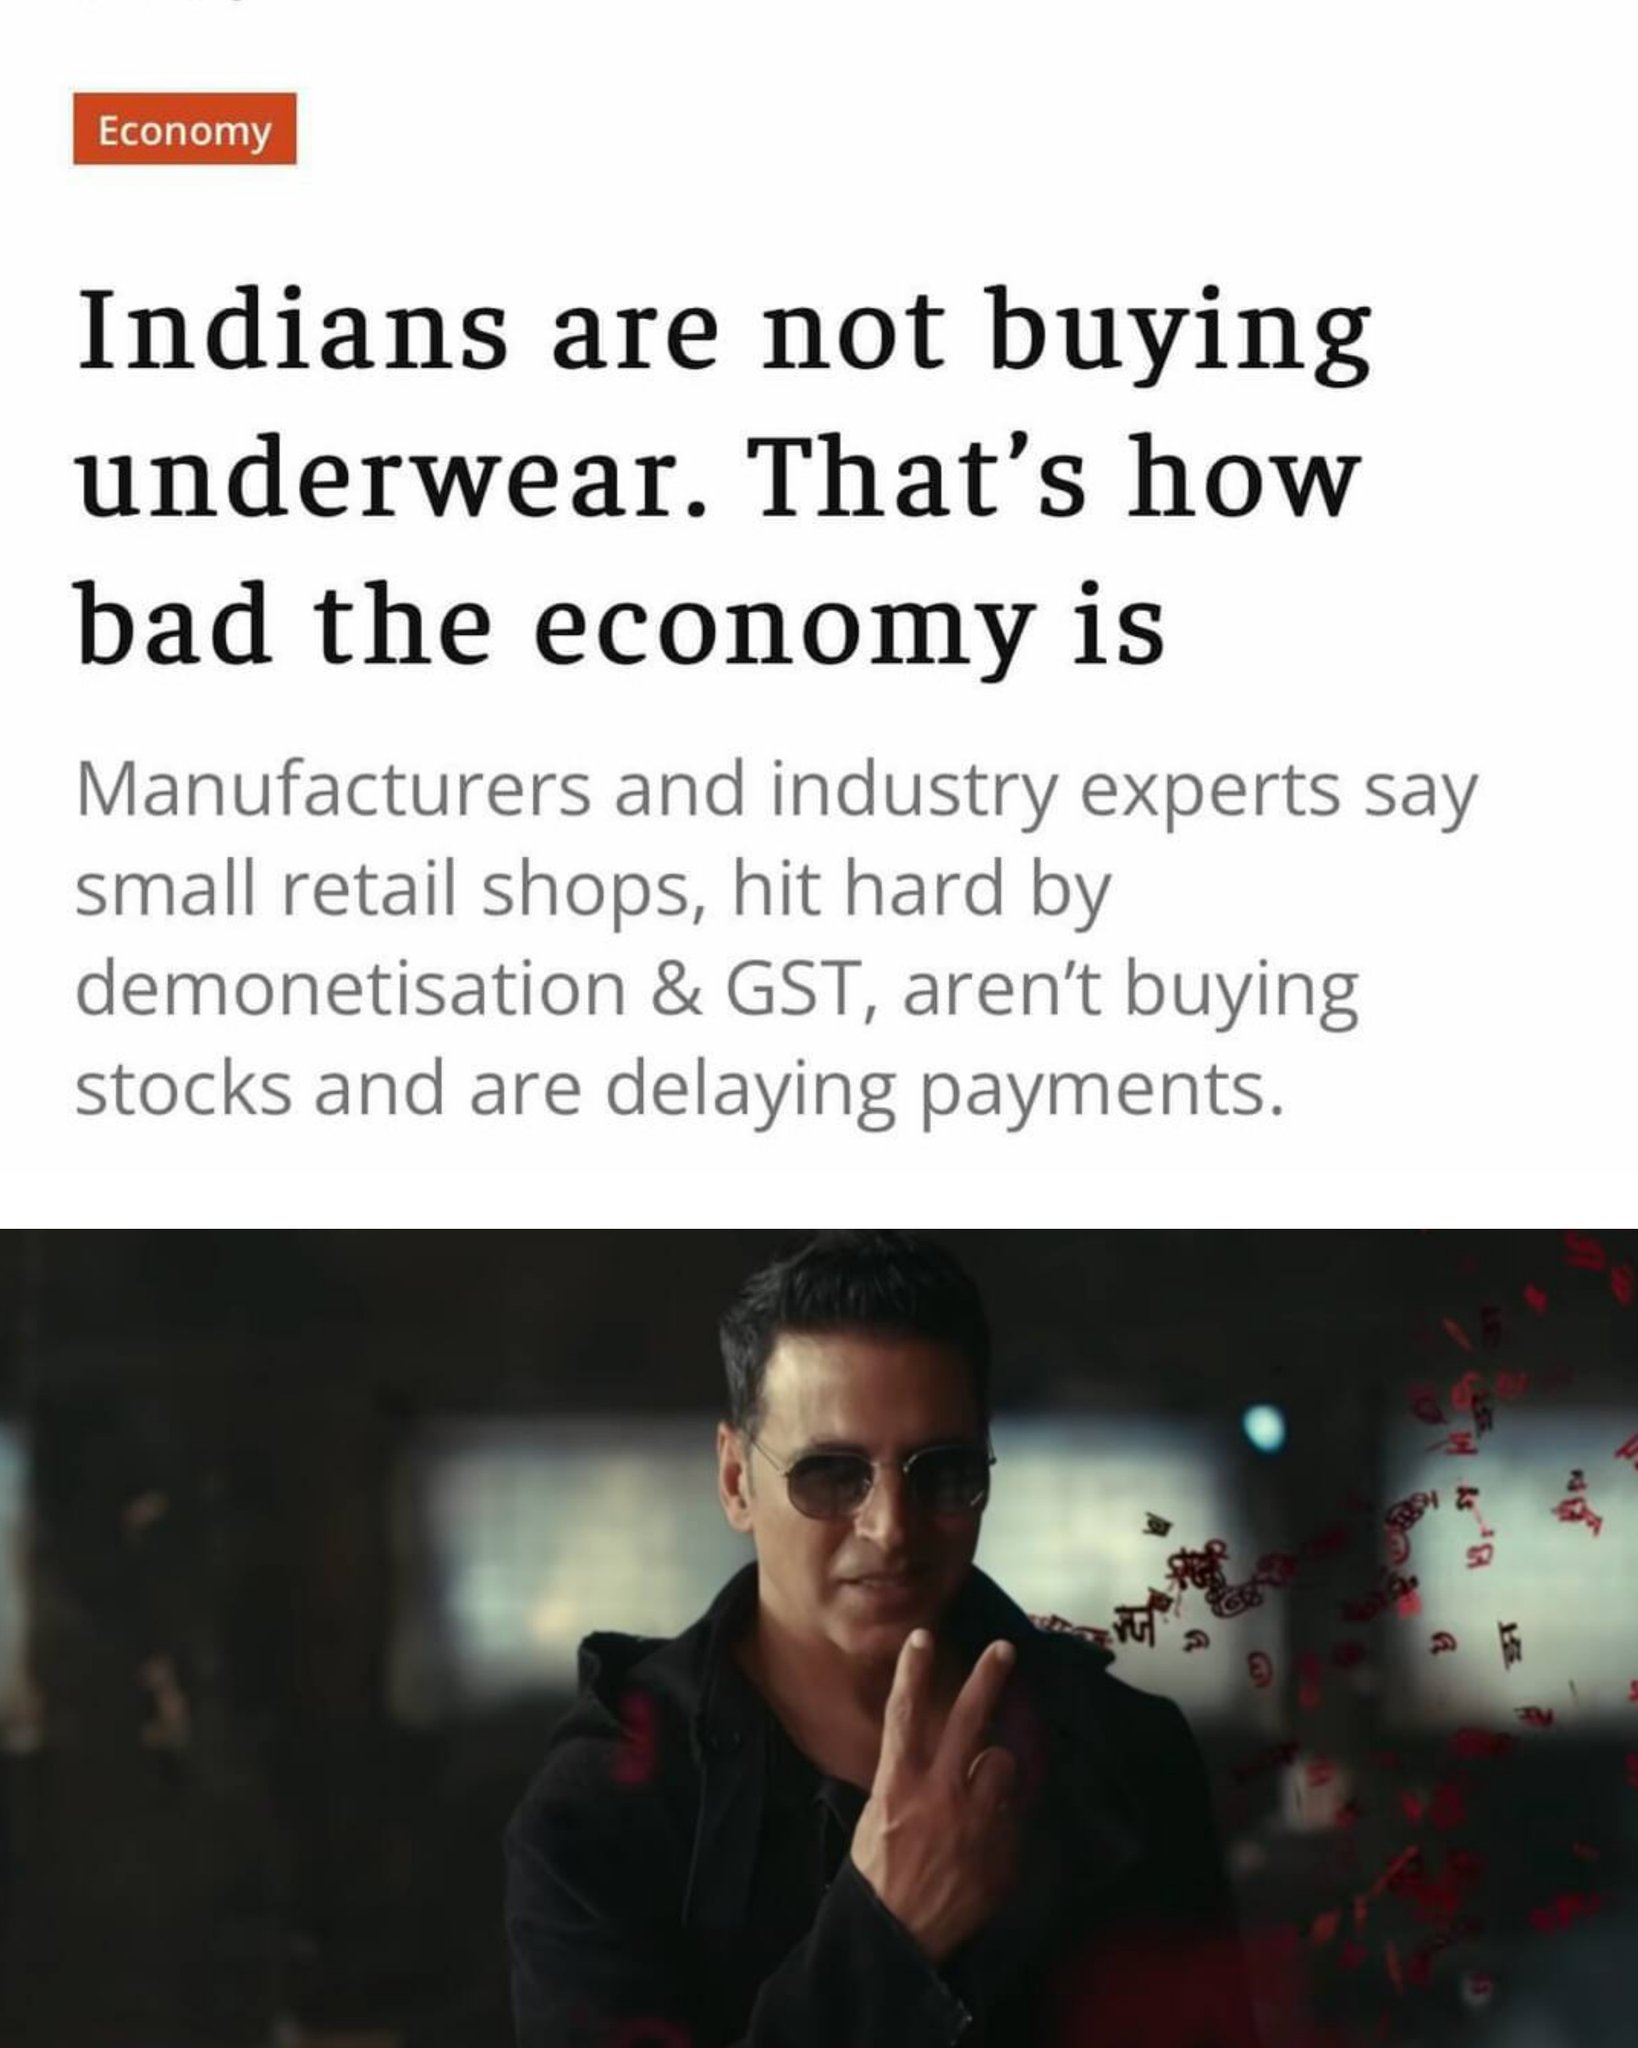 Indians are not buying underwear. That's how bad the economy is